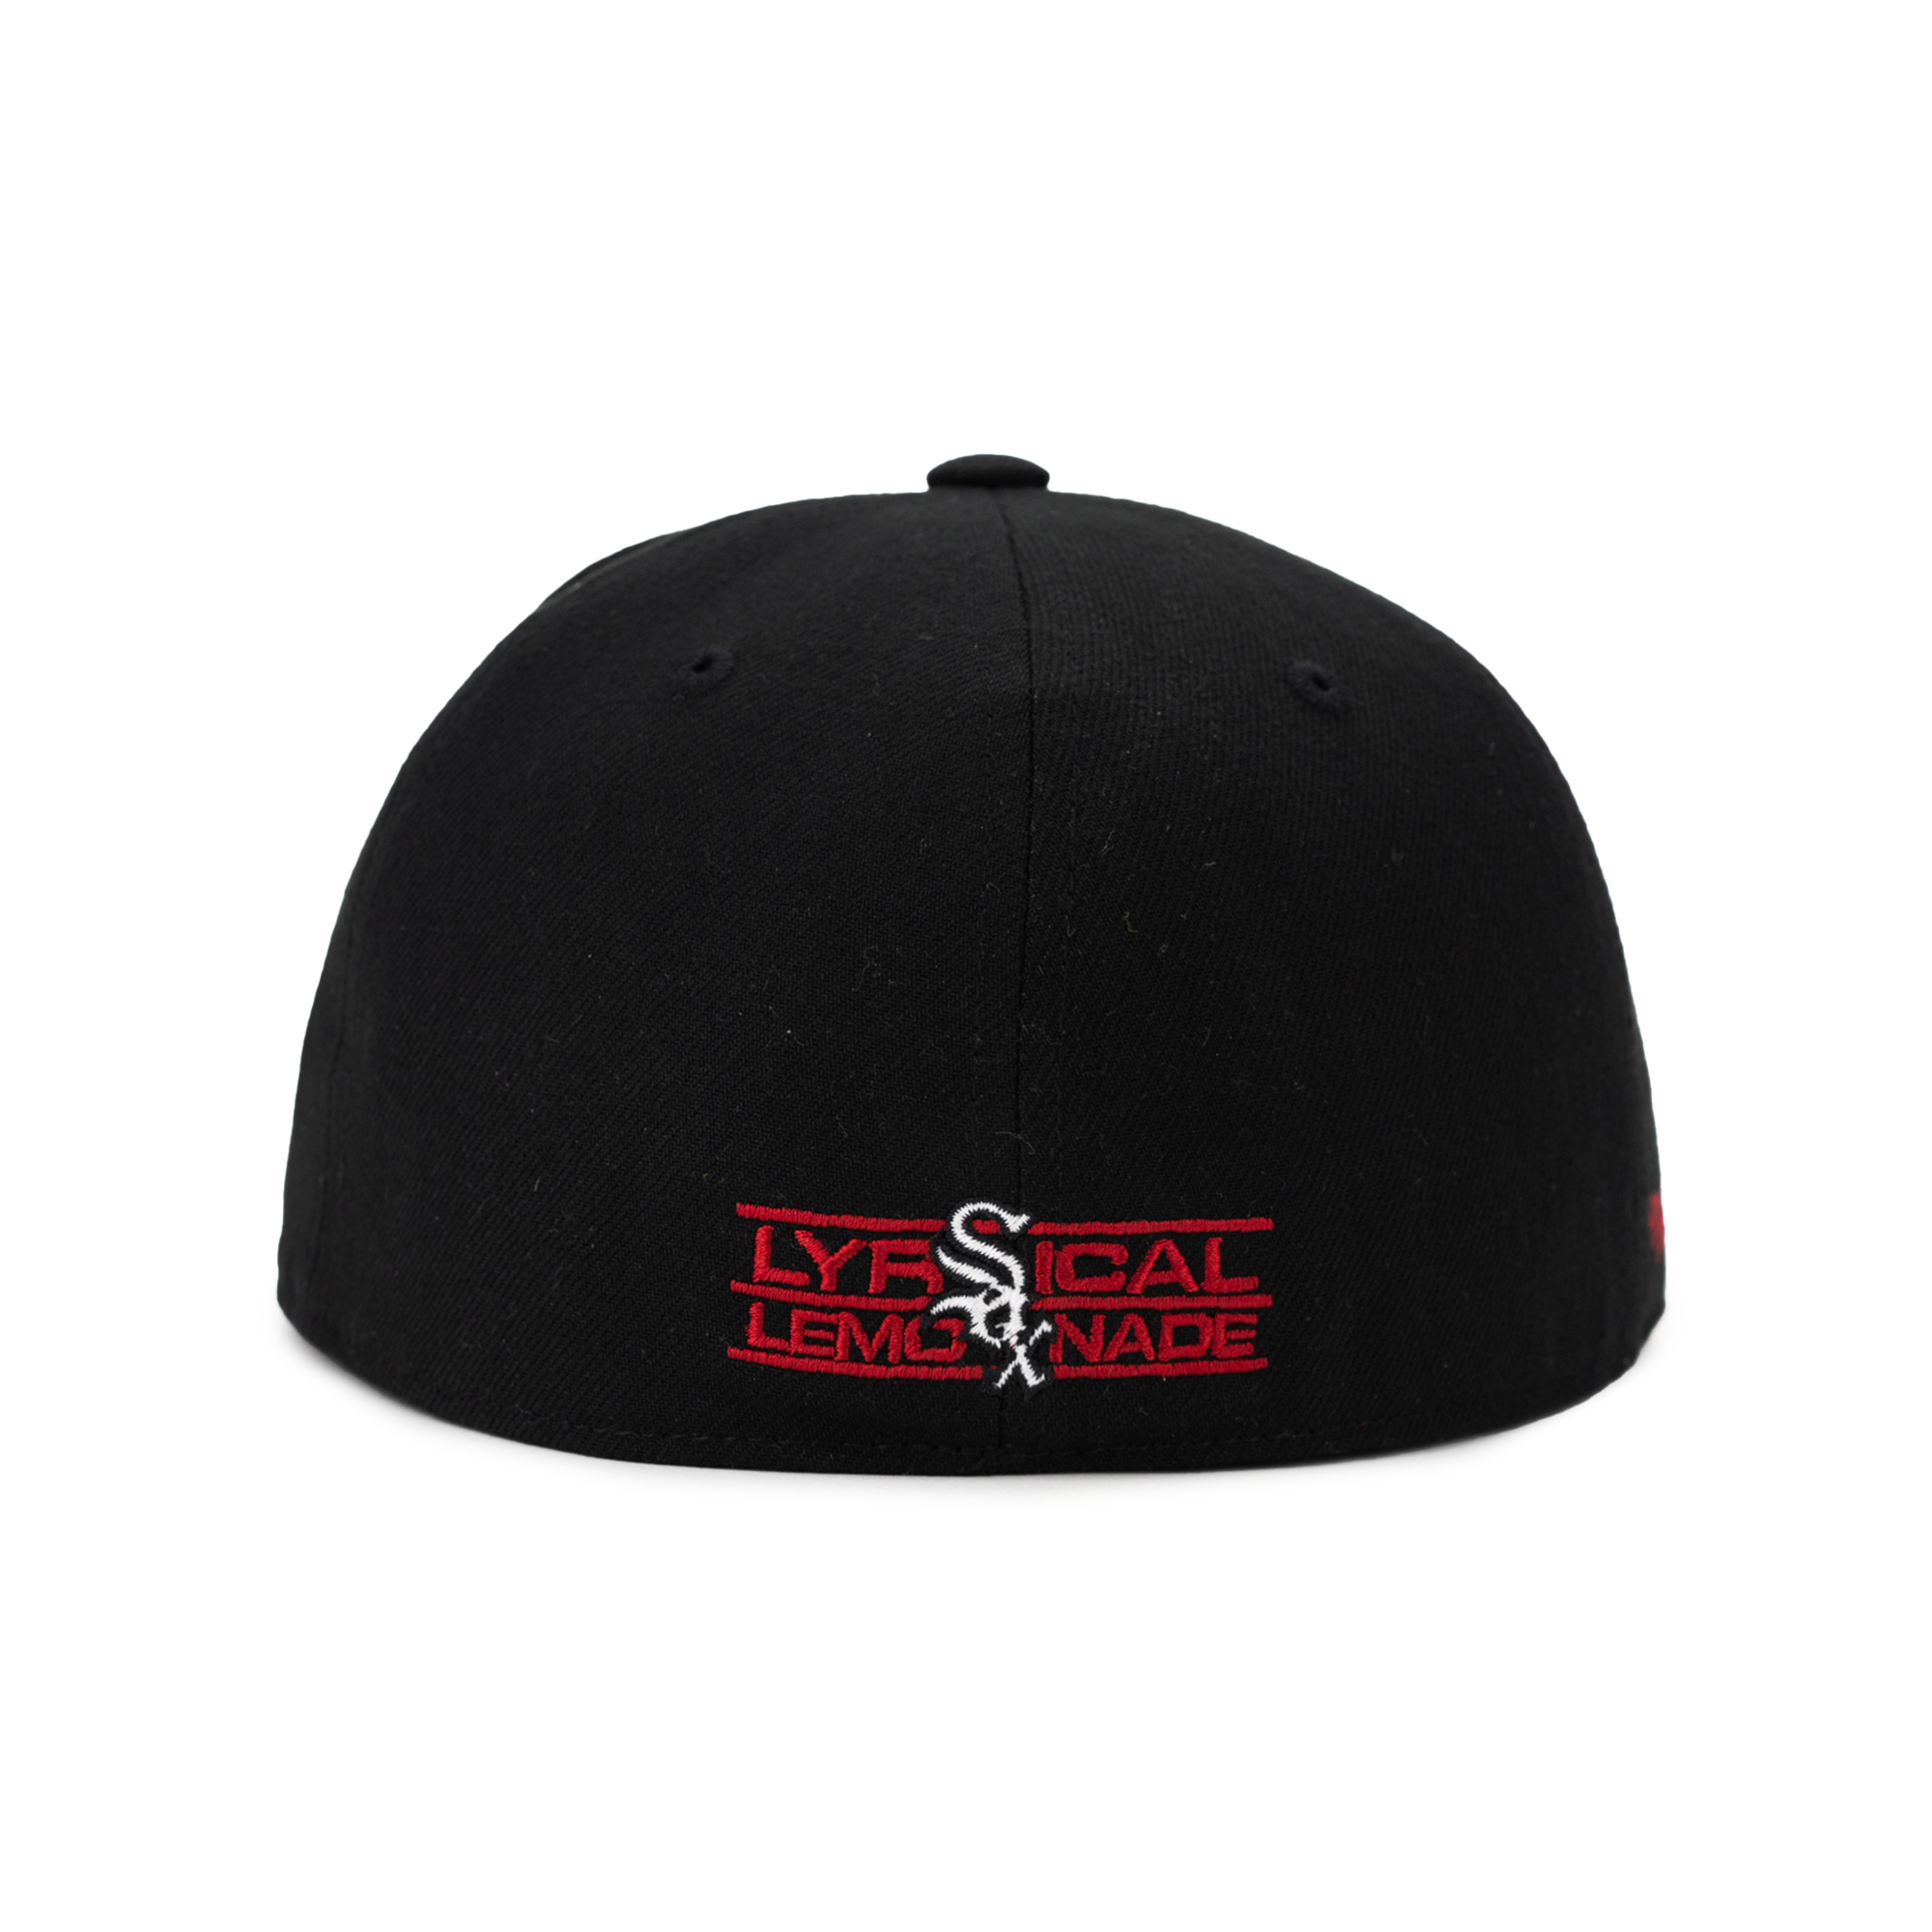 Lyrical Lemonade x White Sox Classic Fitted